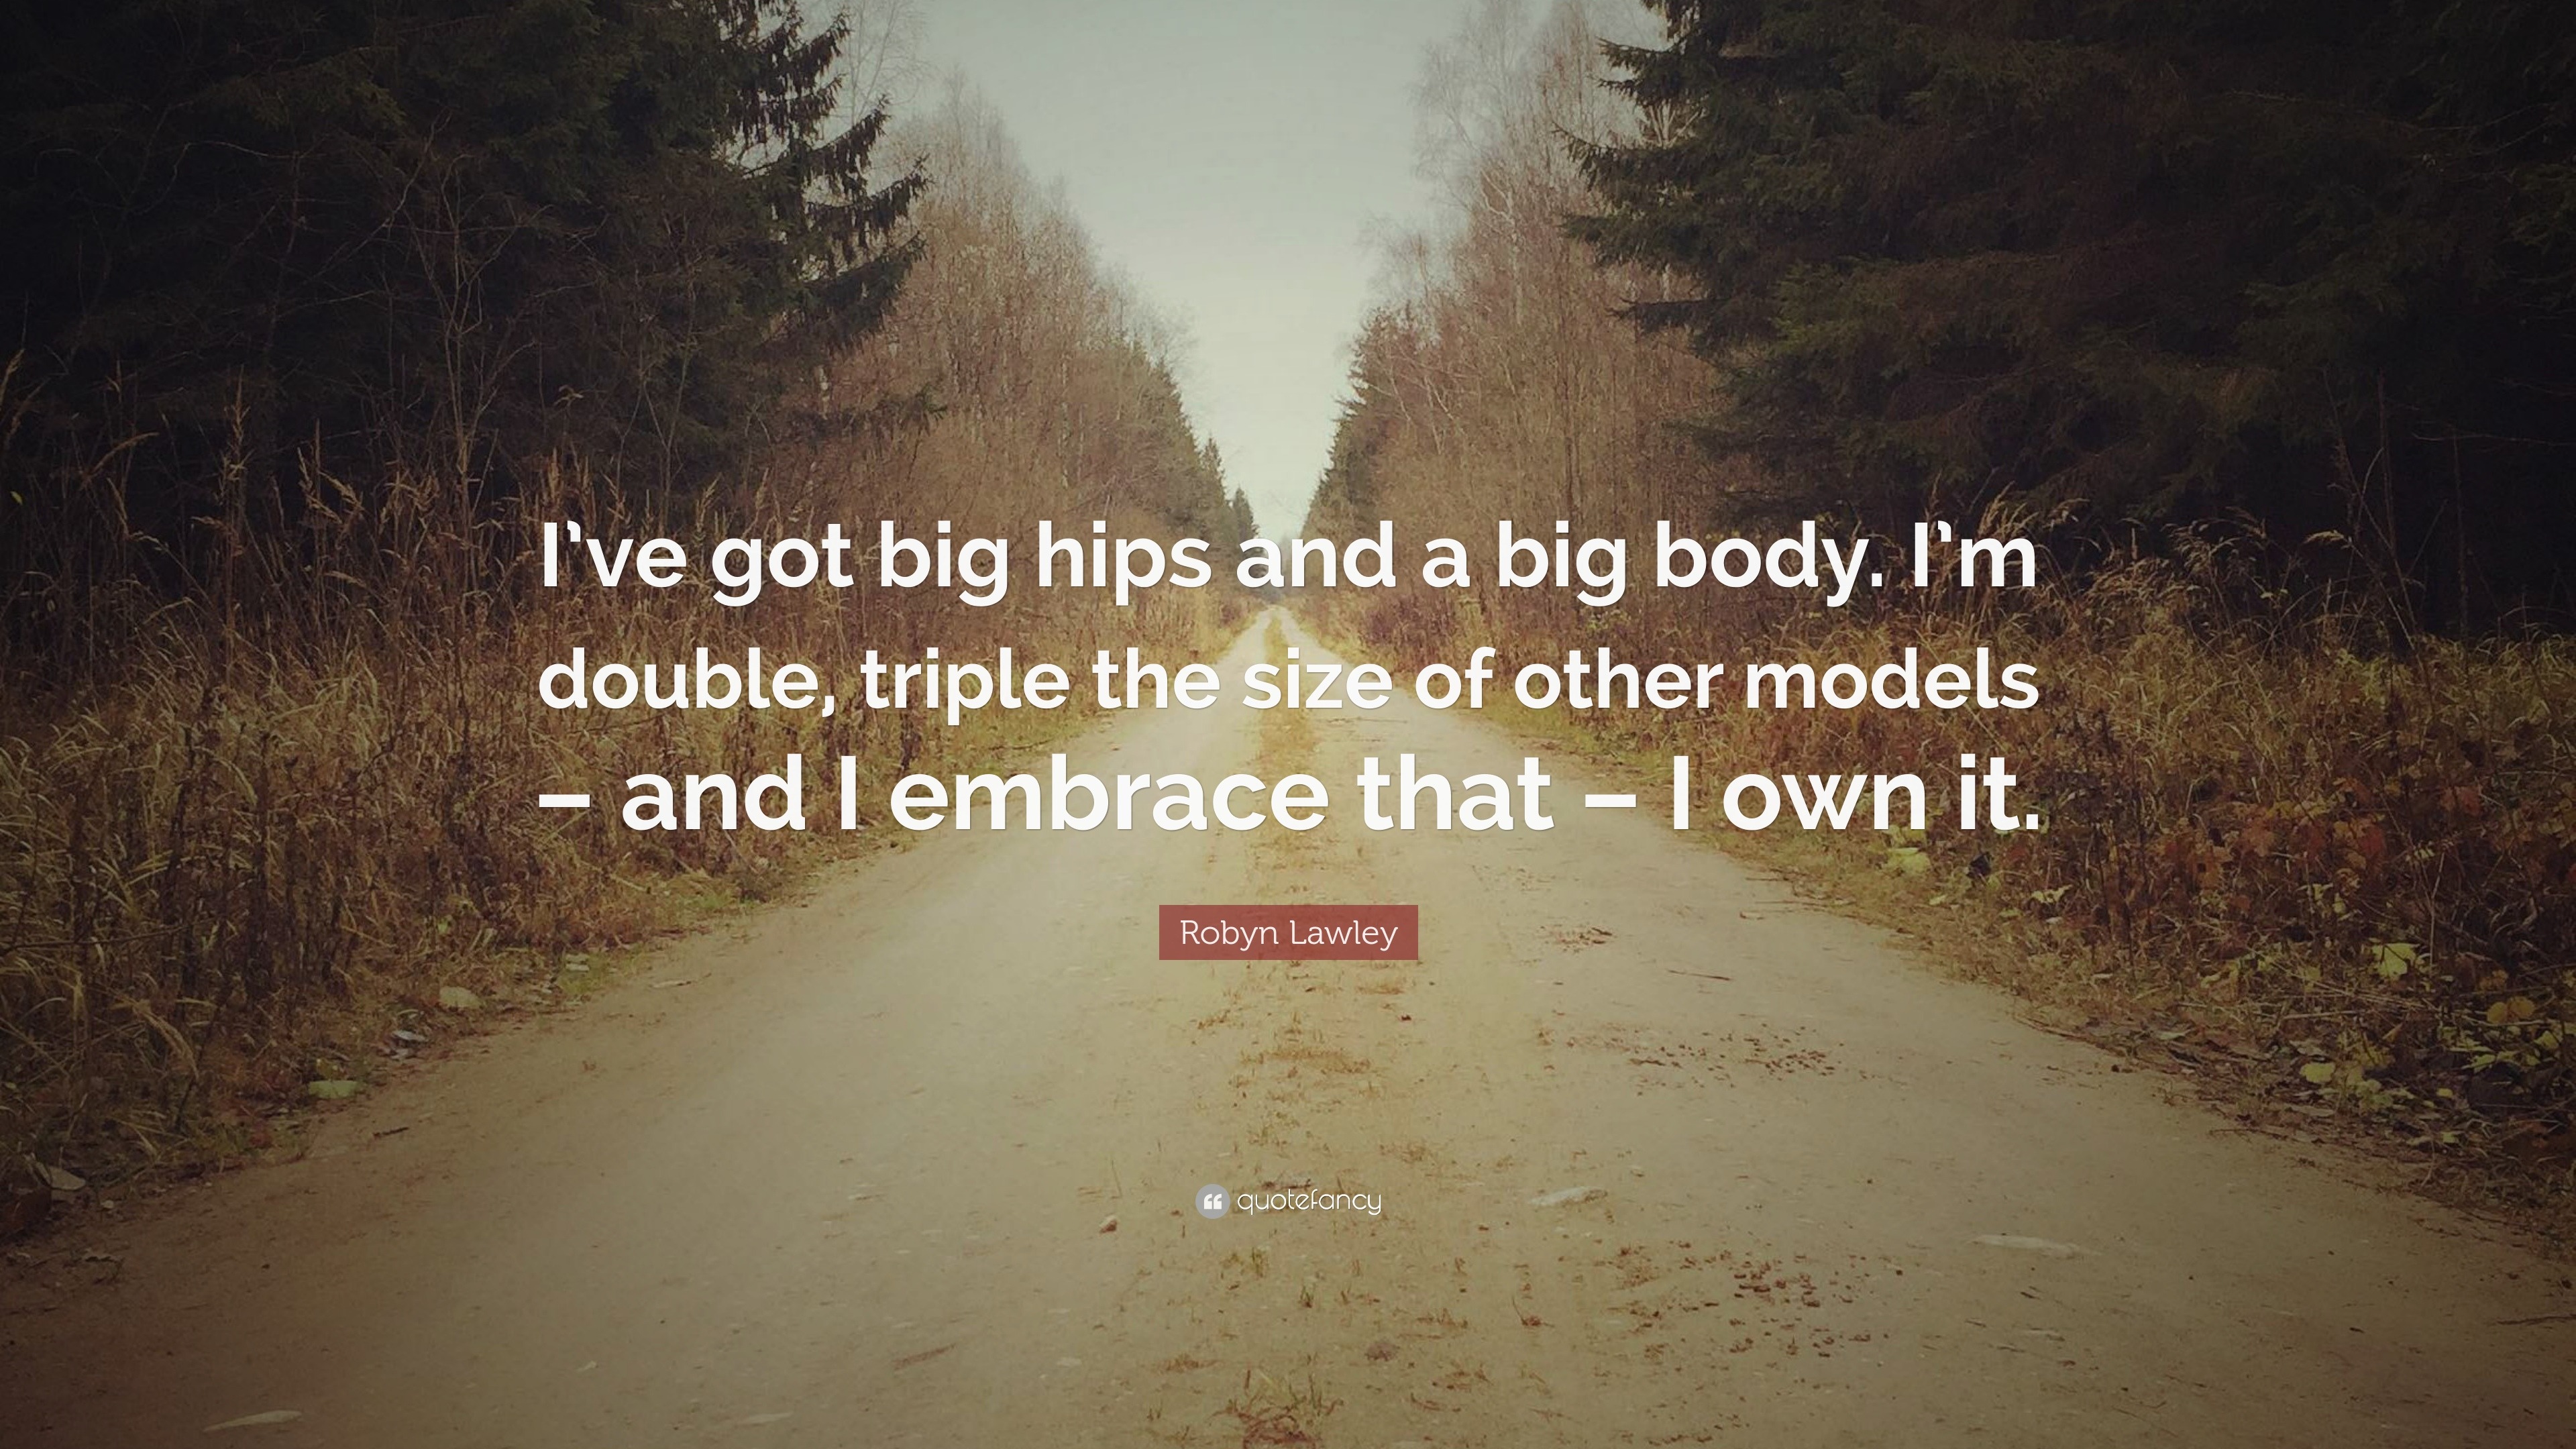 Robyn Lawley Quote: “I've got big hips and a big body. I'm double, triple